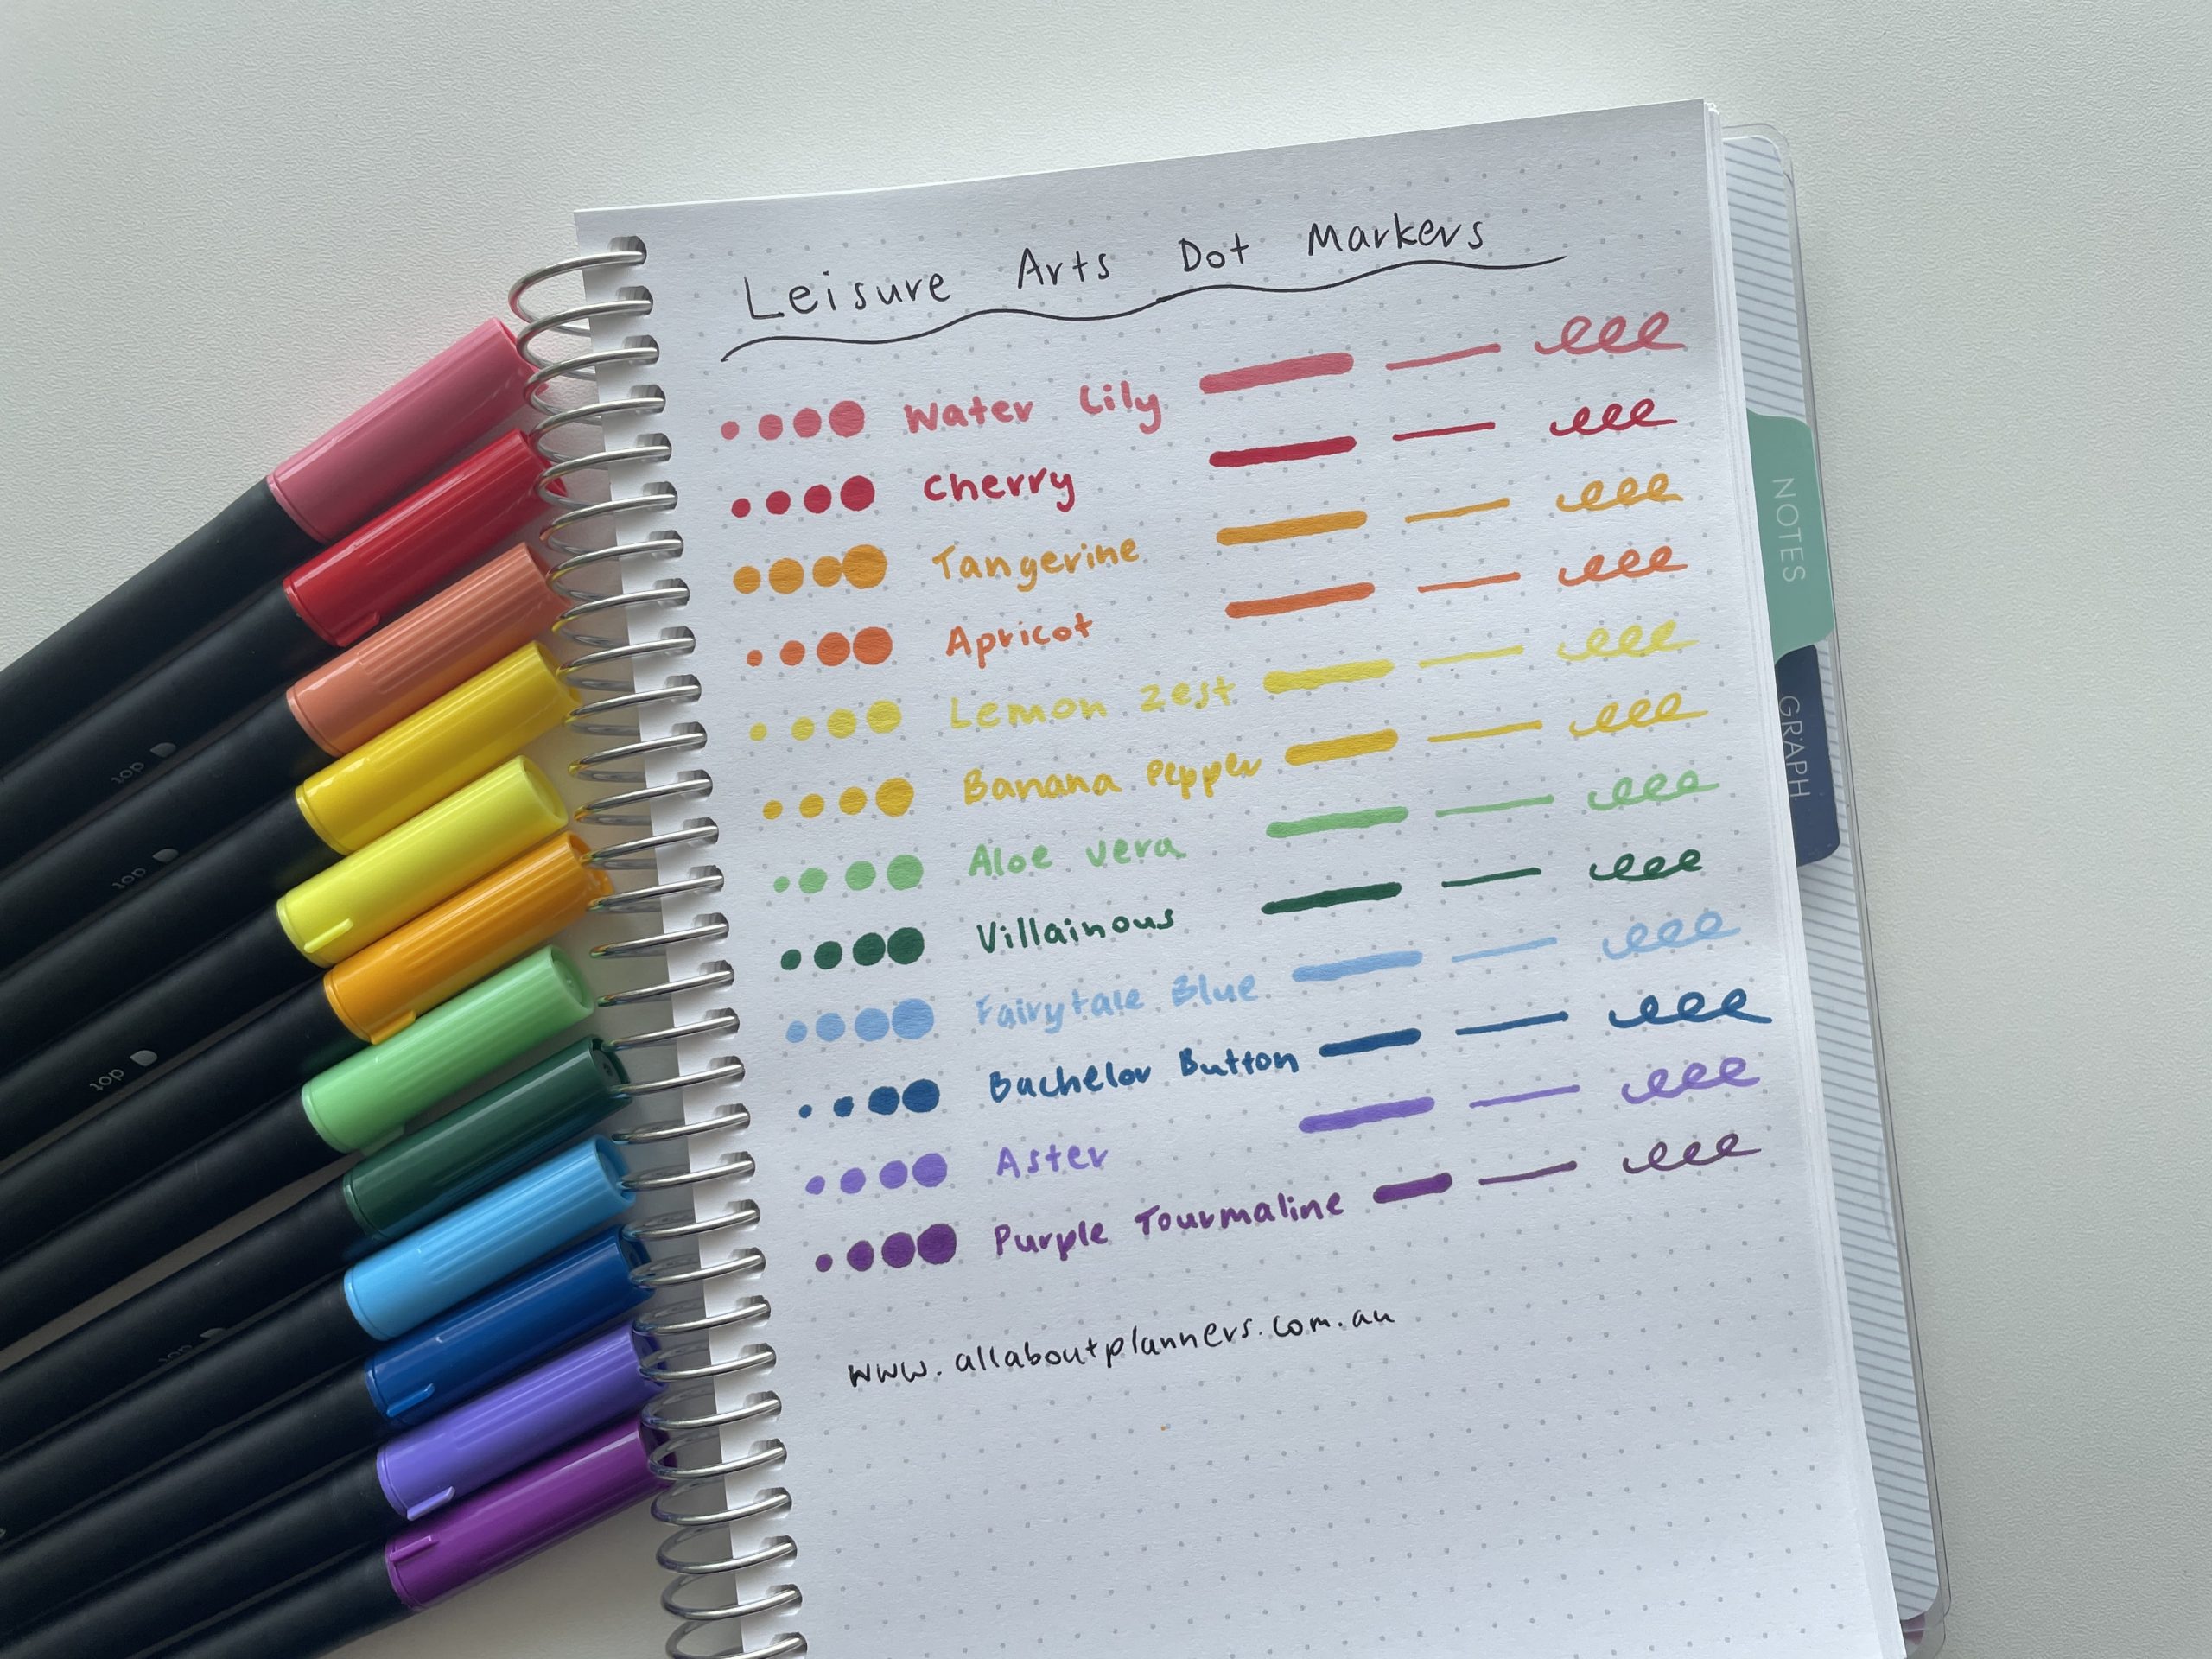 leisure arts dot markers dual ended dot marker and fine tip rainbow colour coding pen testing comparison with tombow dot marker and zig kuretake